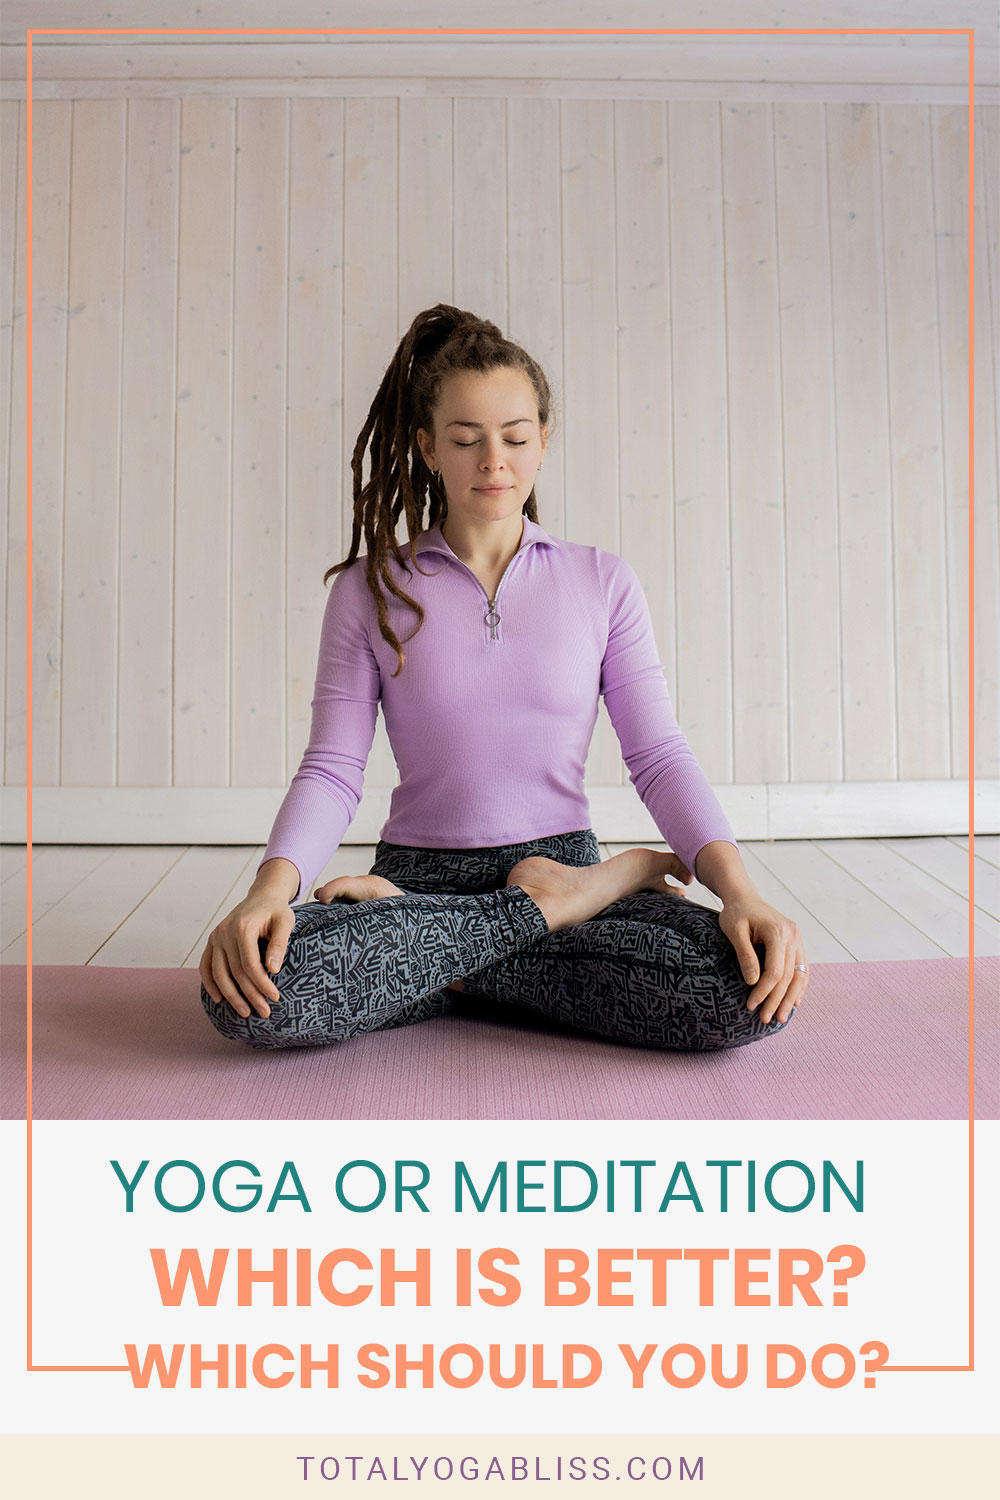 Woman in purple jacket meditating on a purple mat - Yoga Or Meditation - Which Is Better? Which Should You Do?